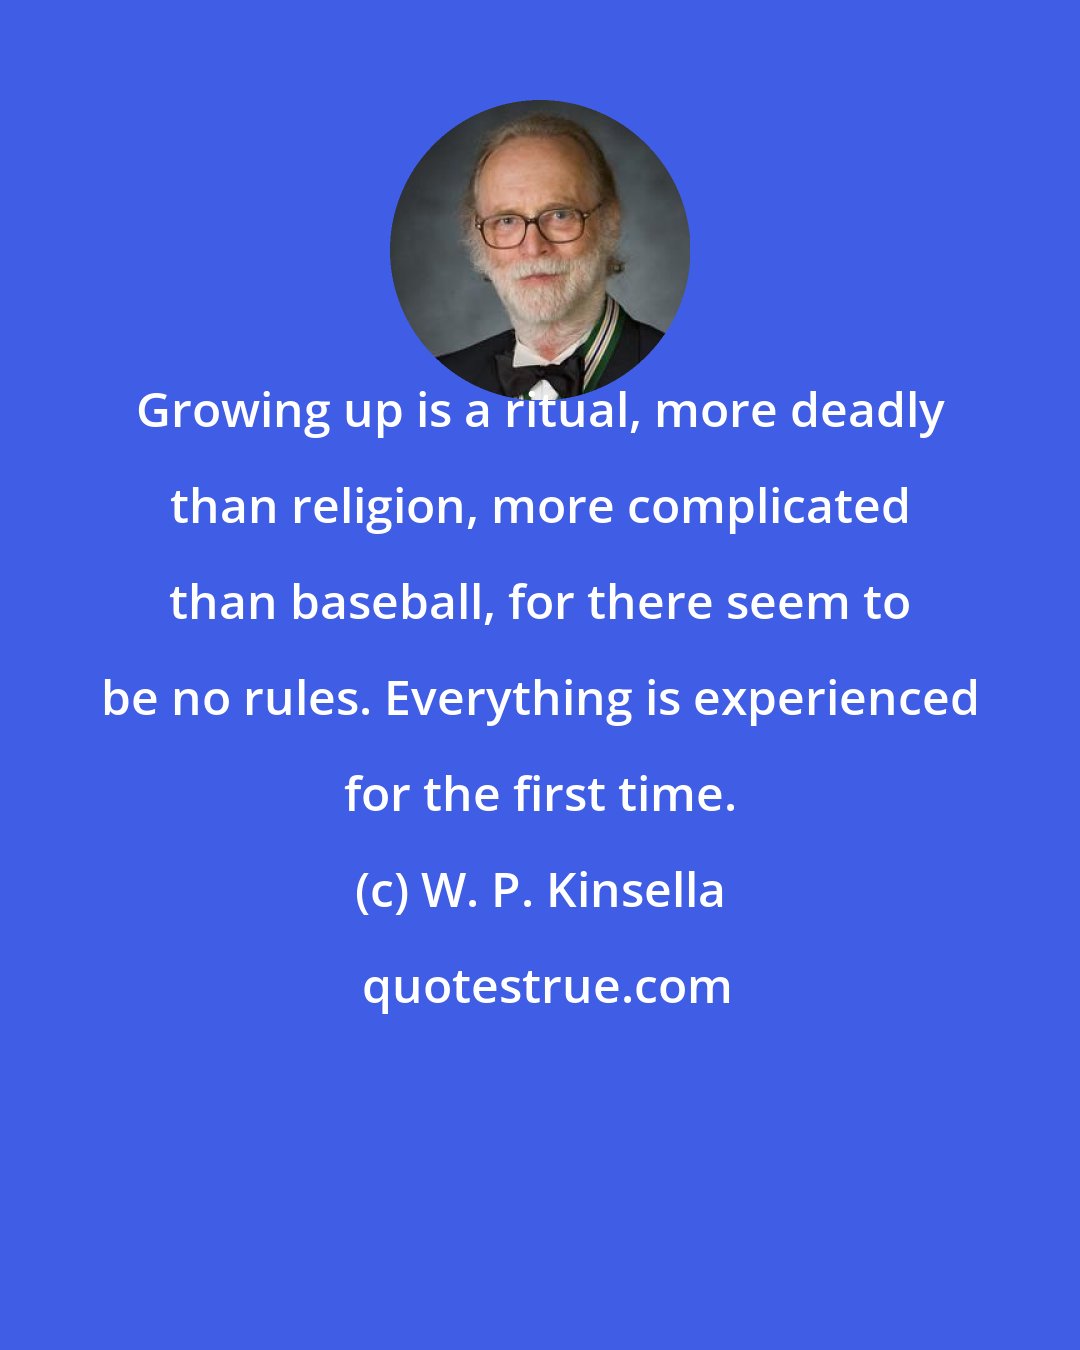 W. P. Kinsella: Growing up is a ritual, more deadly than religion, more complicated than baseball, for there seem to be no rules. Everything is experienced for the first time.